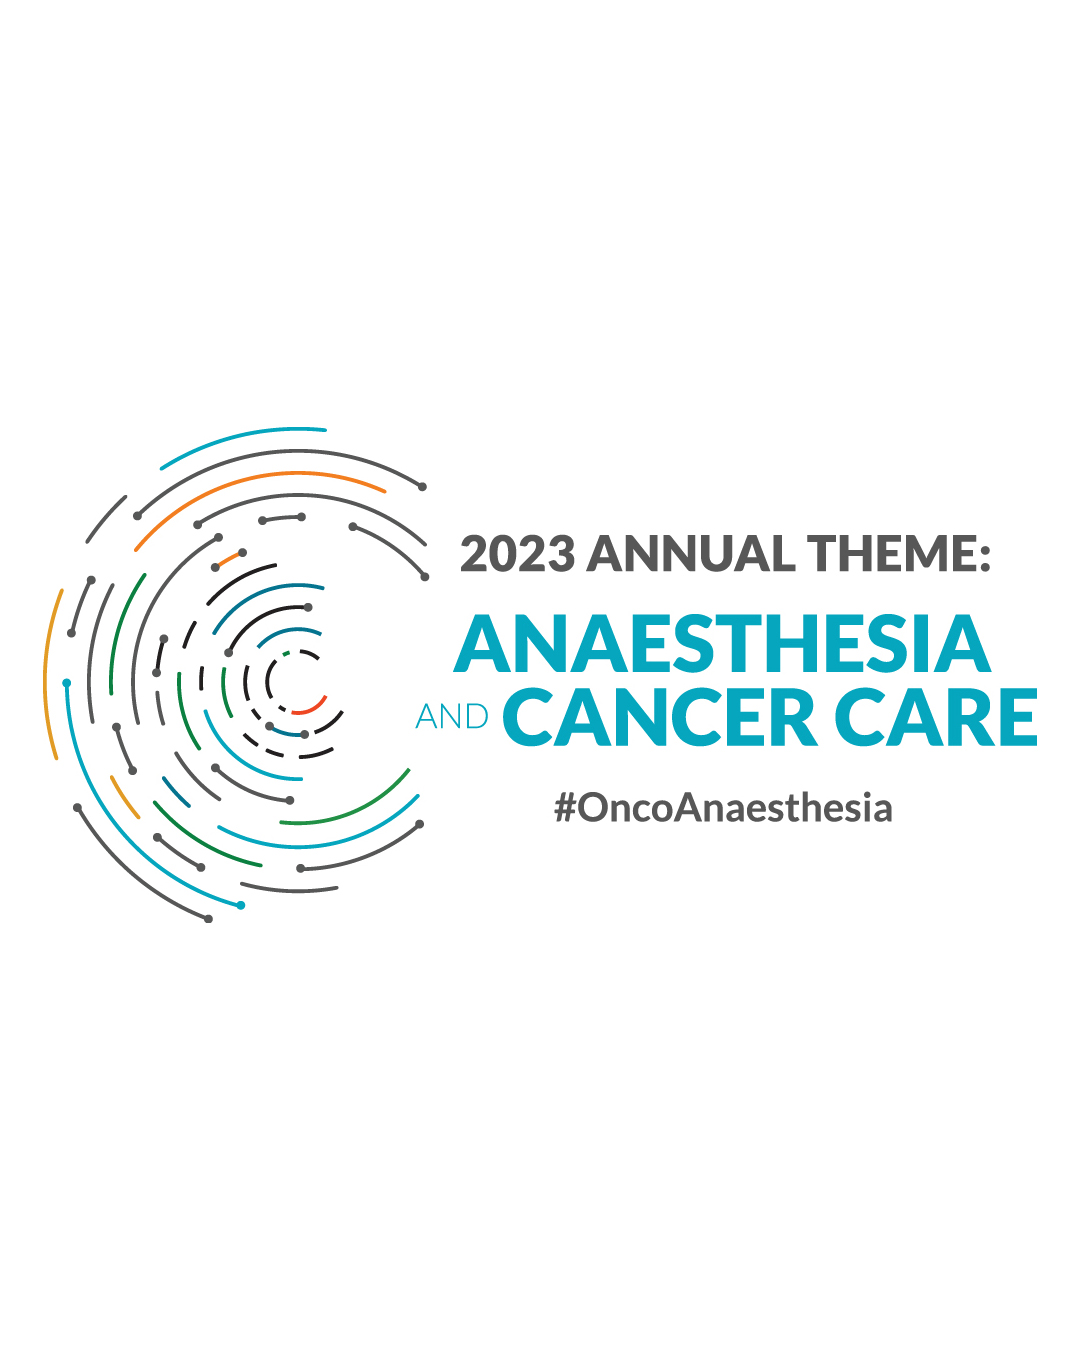 Why WFSA is Focusing on Anaesthesia and Cancer Care in 2023